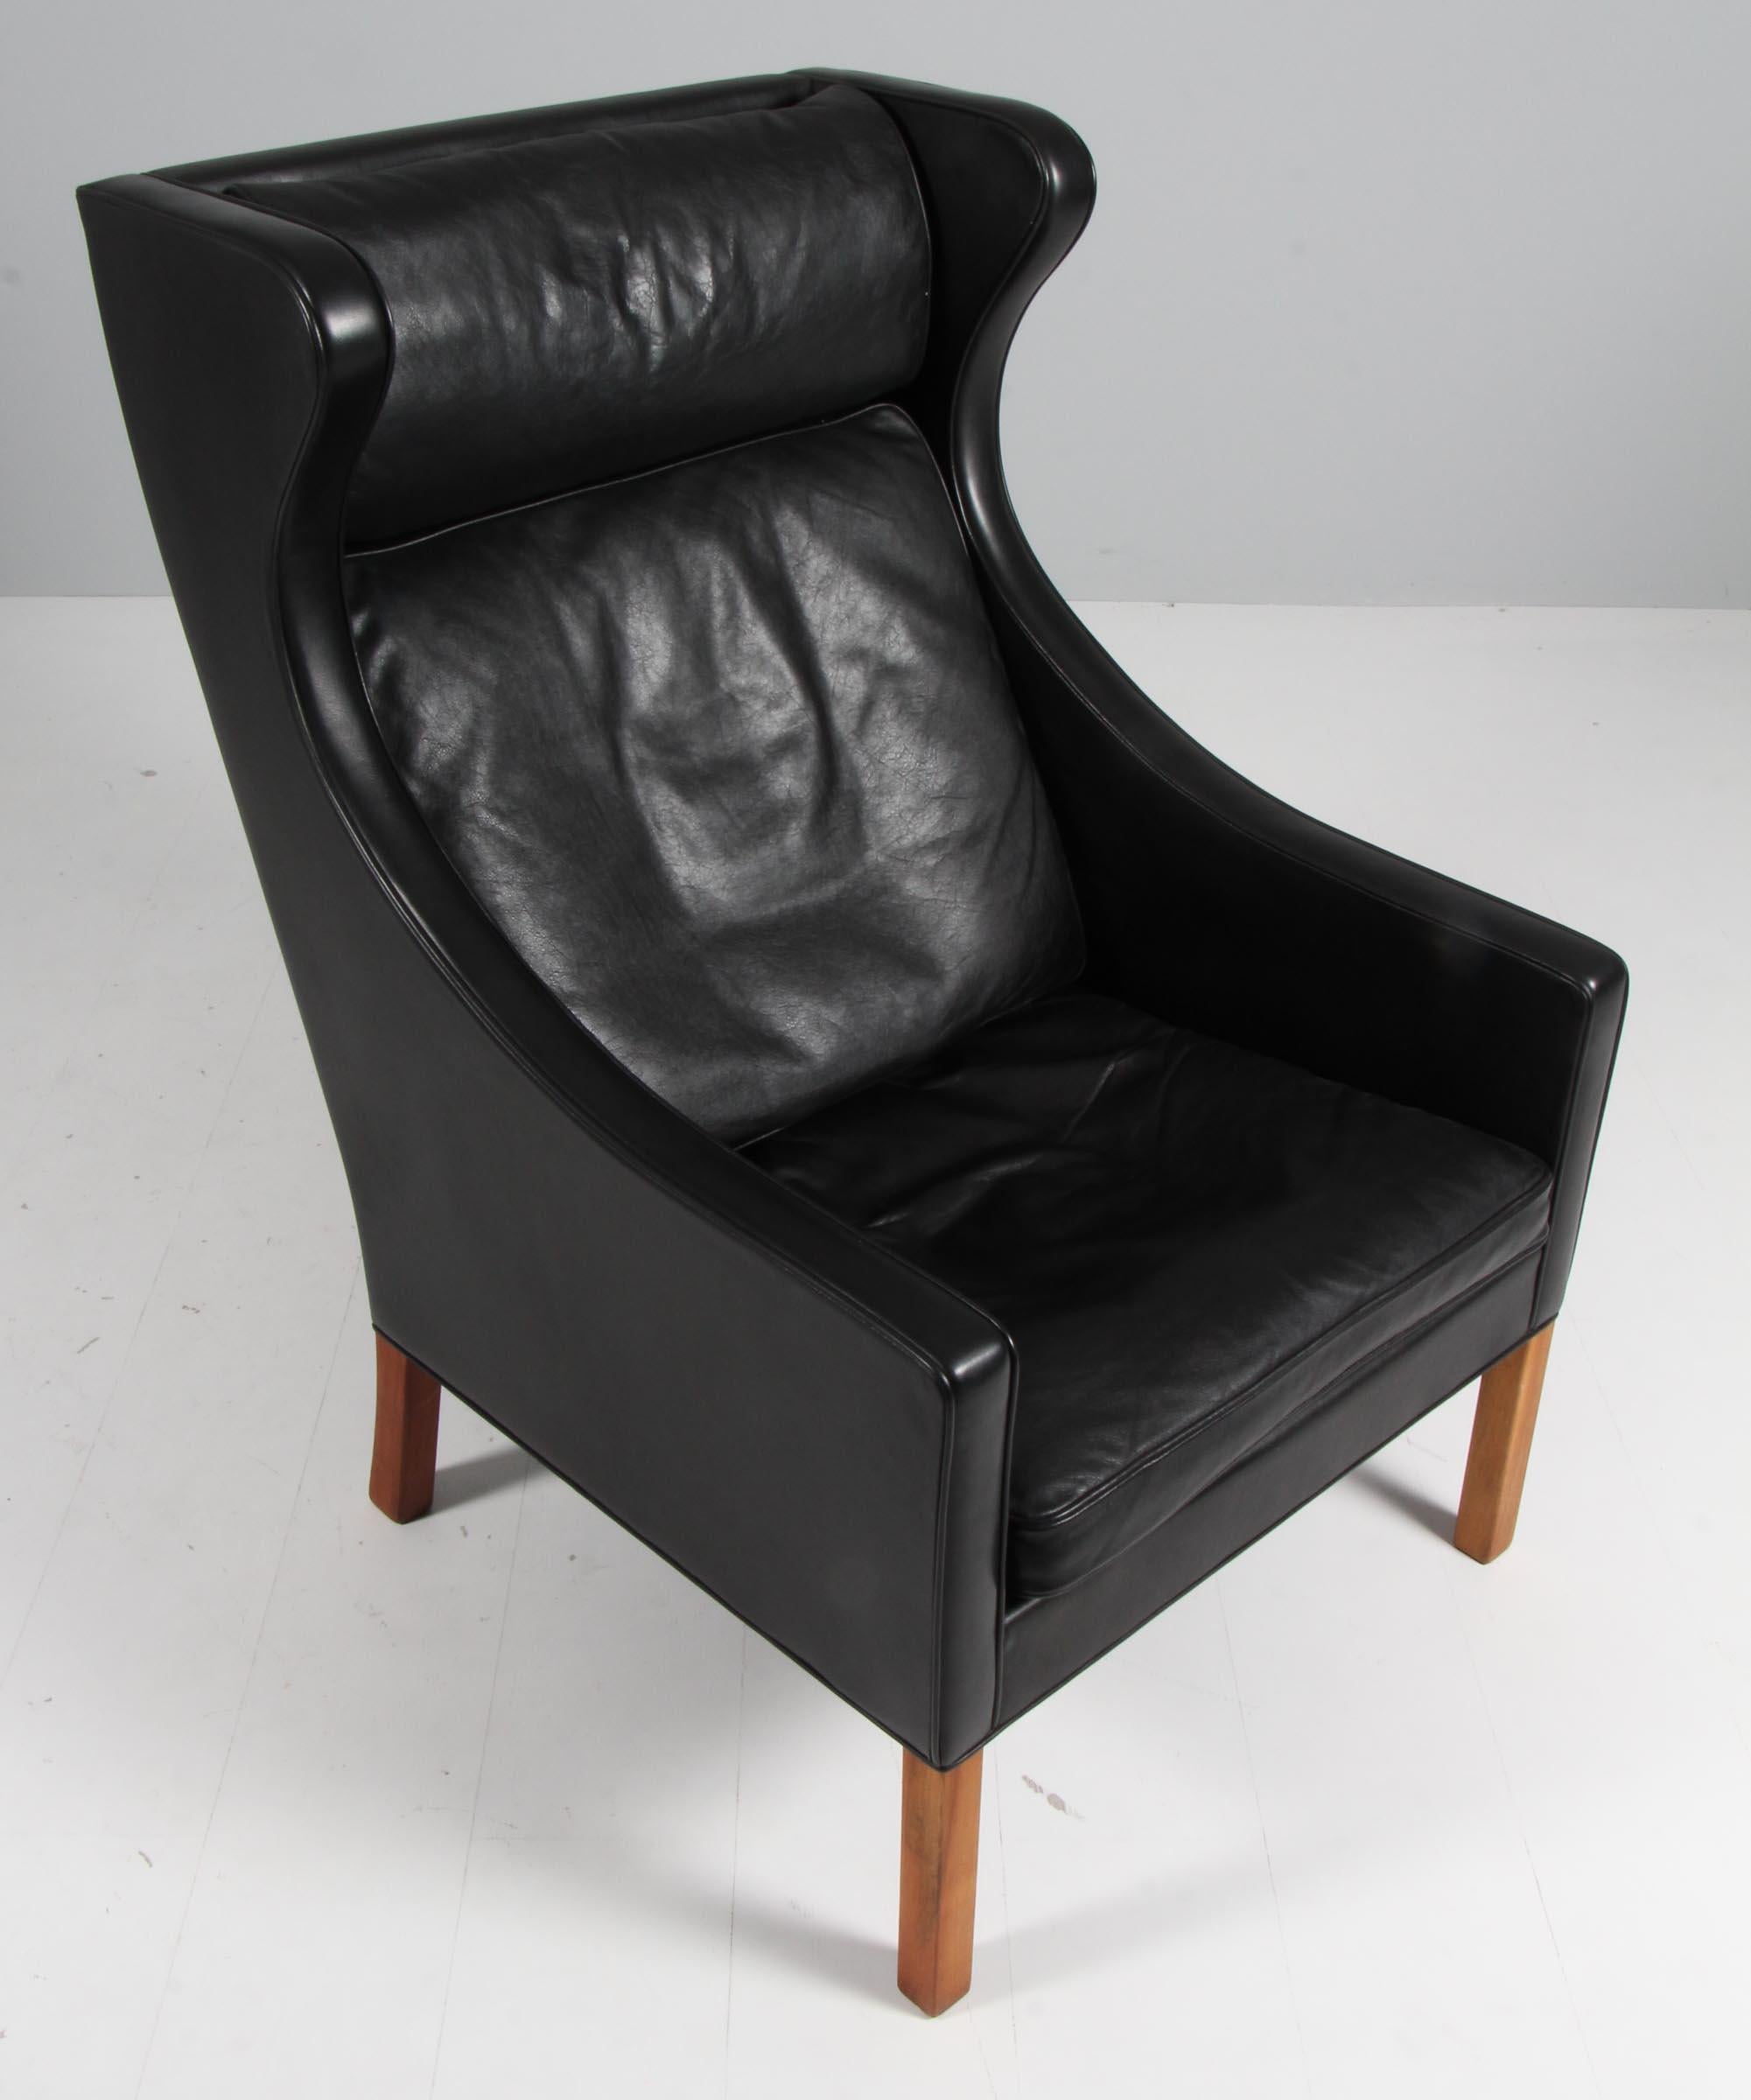 Børge Mogensen wingback chair in original Black leather upholstery.

Legs in teak.

Model 2204, made by Fredericia Furniture.